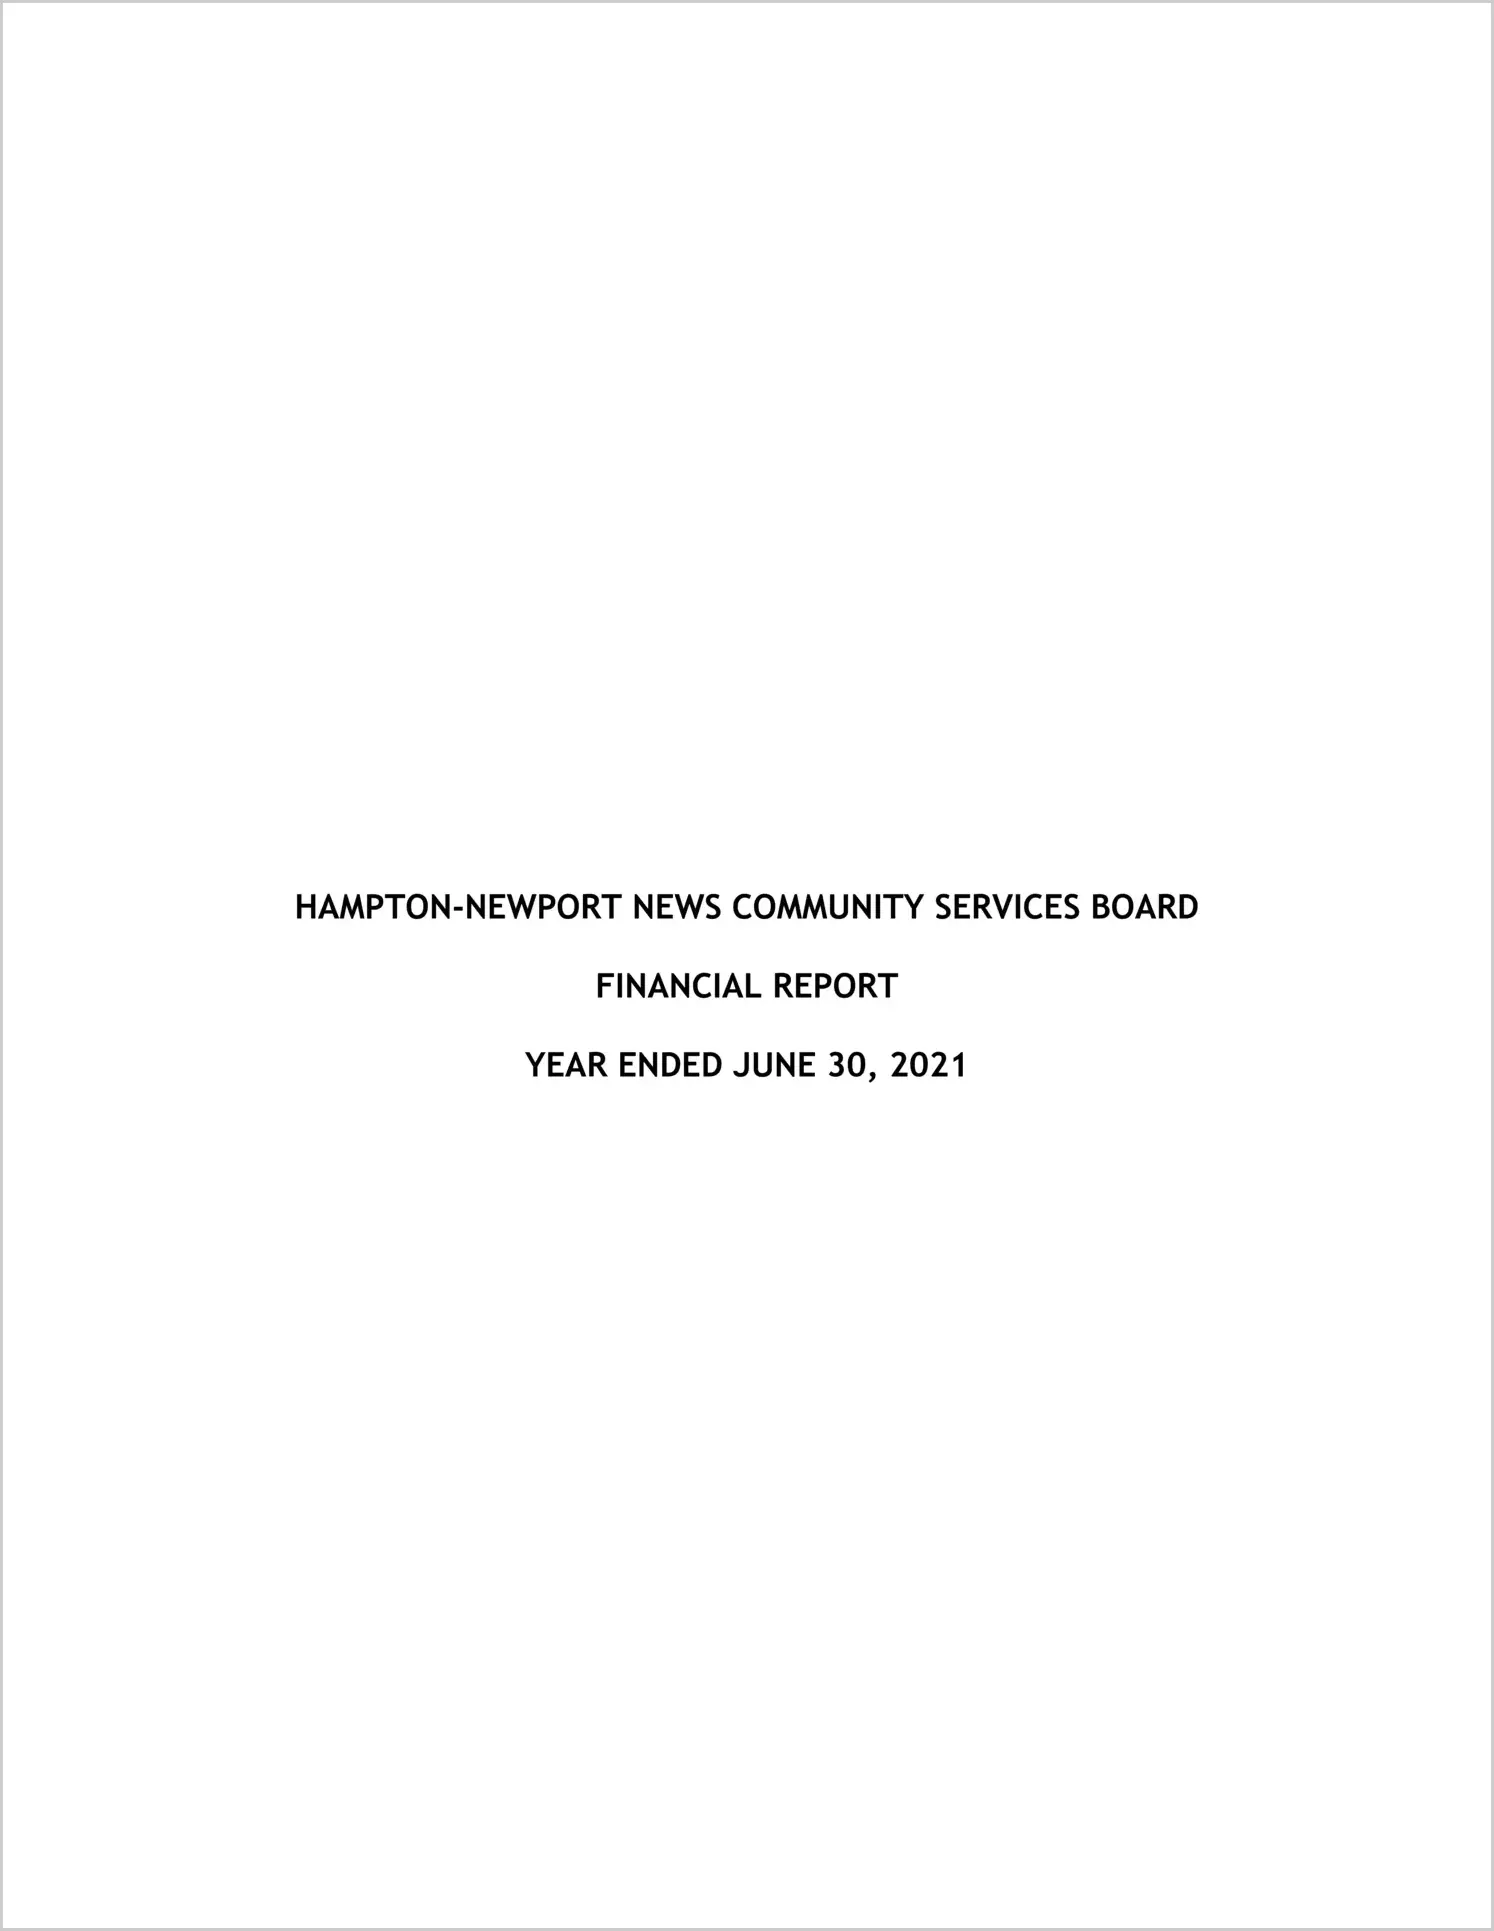 2021 ABC/Other Annual Financial Report  for Hampton-Newport News Community Services Board